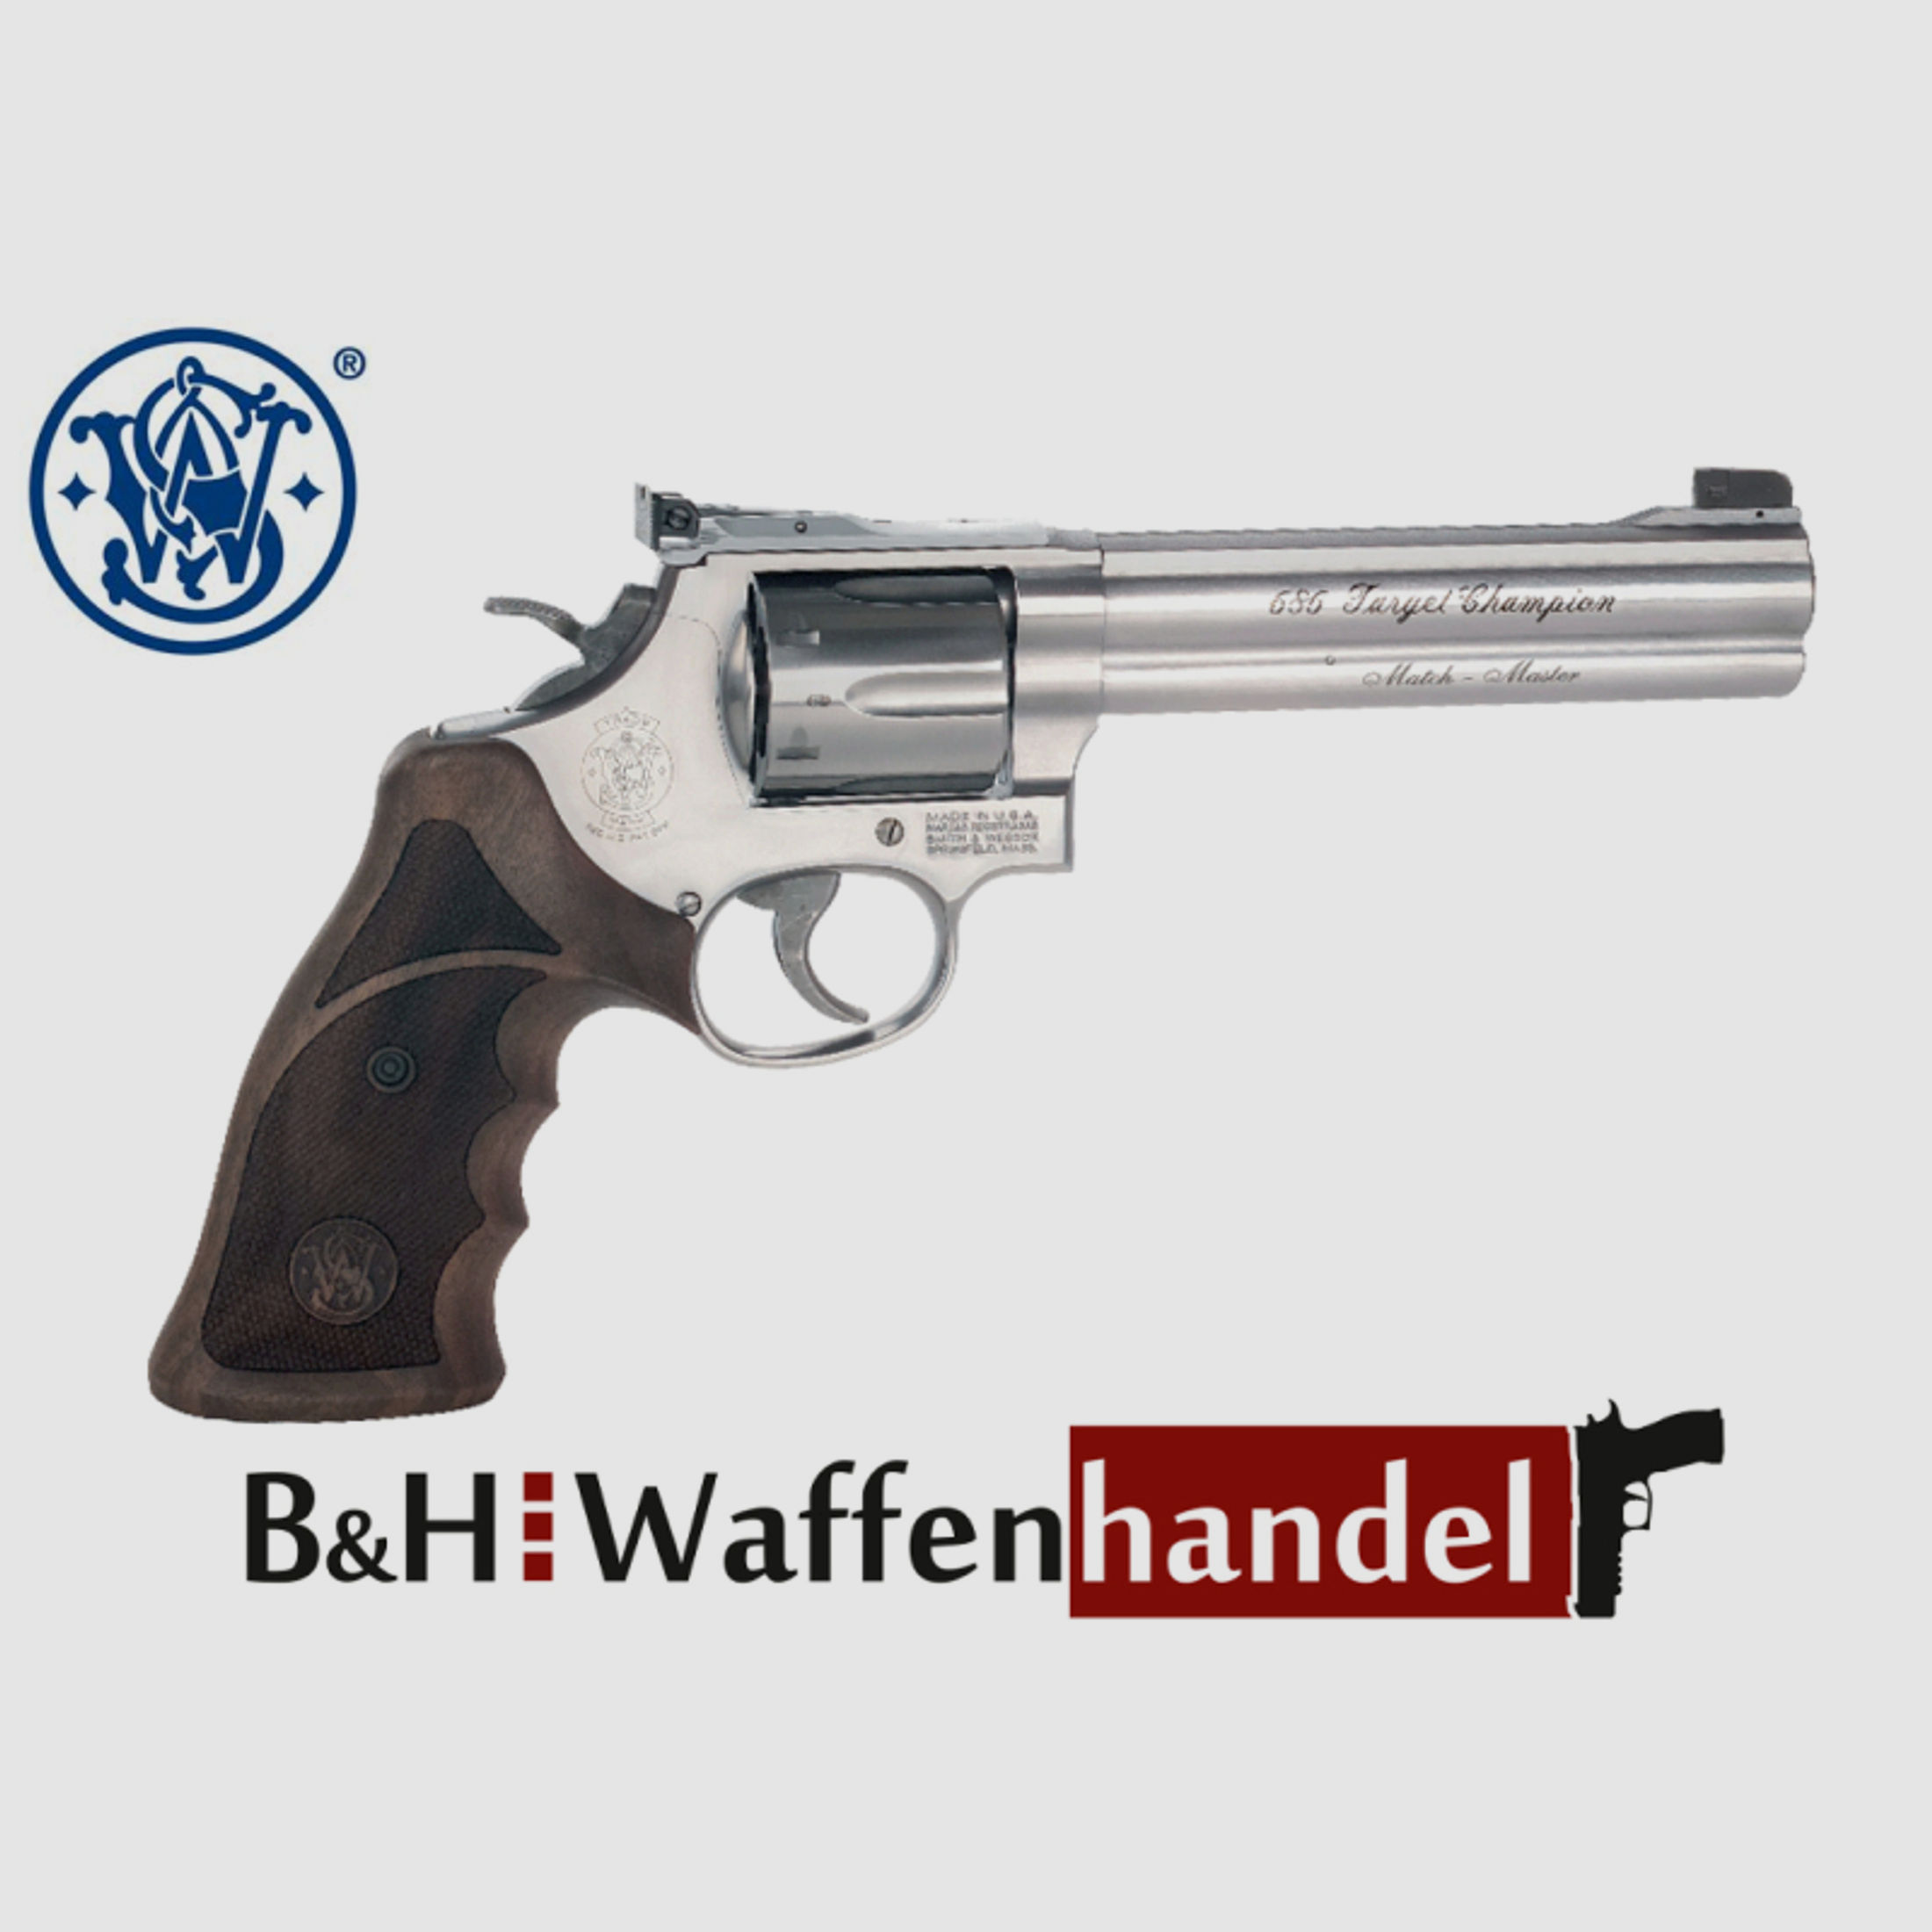 Neuwaffe: S&W 686 Target Champion Deluxe MATCH MASTER Revolver .357 Magnum Stainless Smith & Wesson